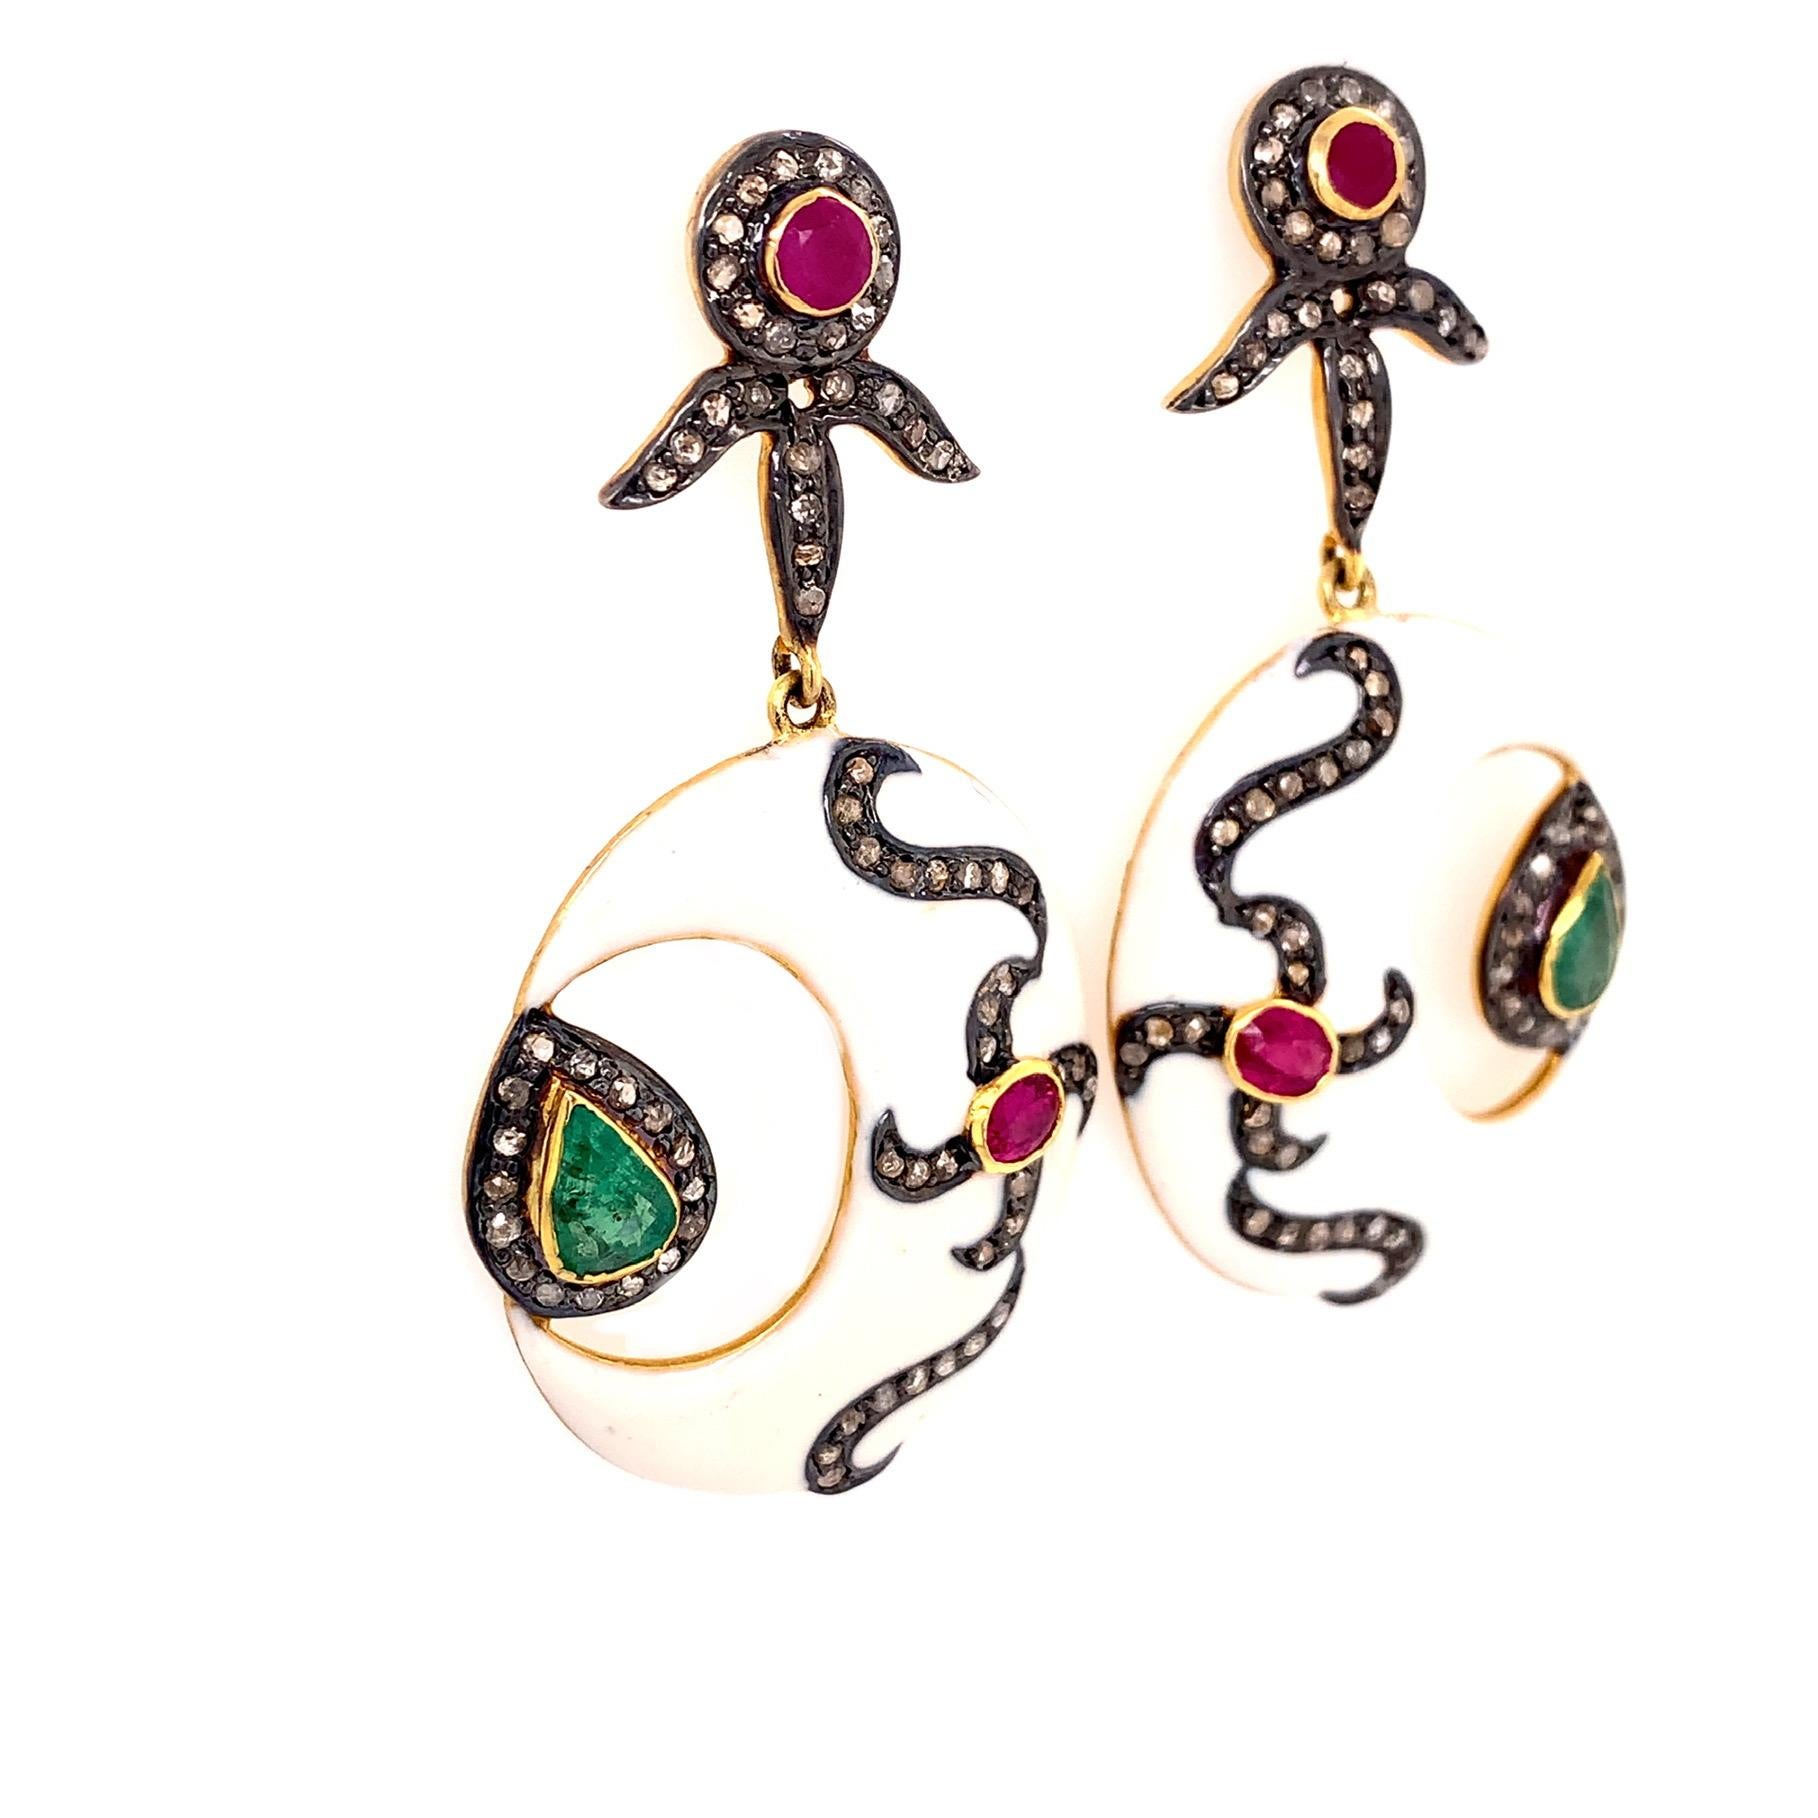 Rustic Collection

Perfect contrast in these black and ivory toned Enamel and rustic Diamond crescent moon tear drop shaped earrings with ruby and emerald set in sterling silver and 14K gold plating to create motifs.

Emerald: 1.07ct total